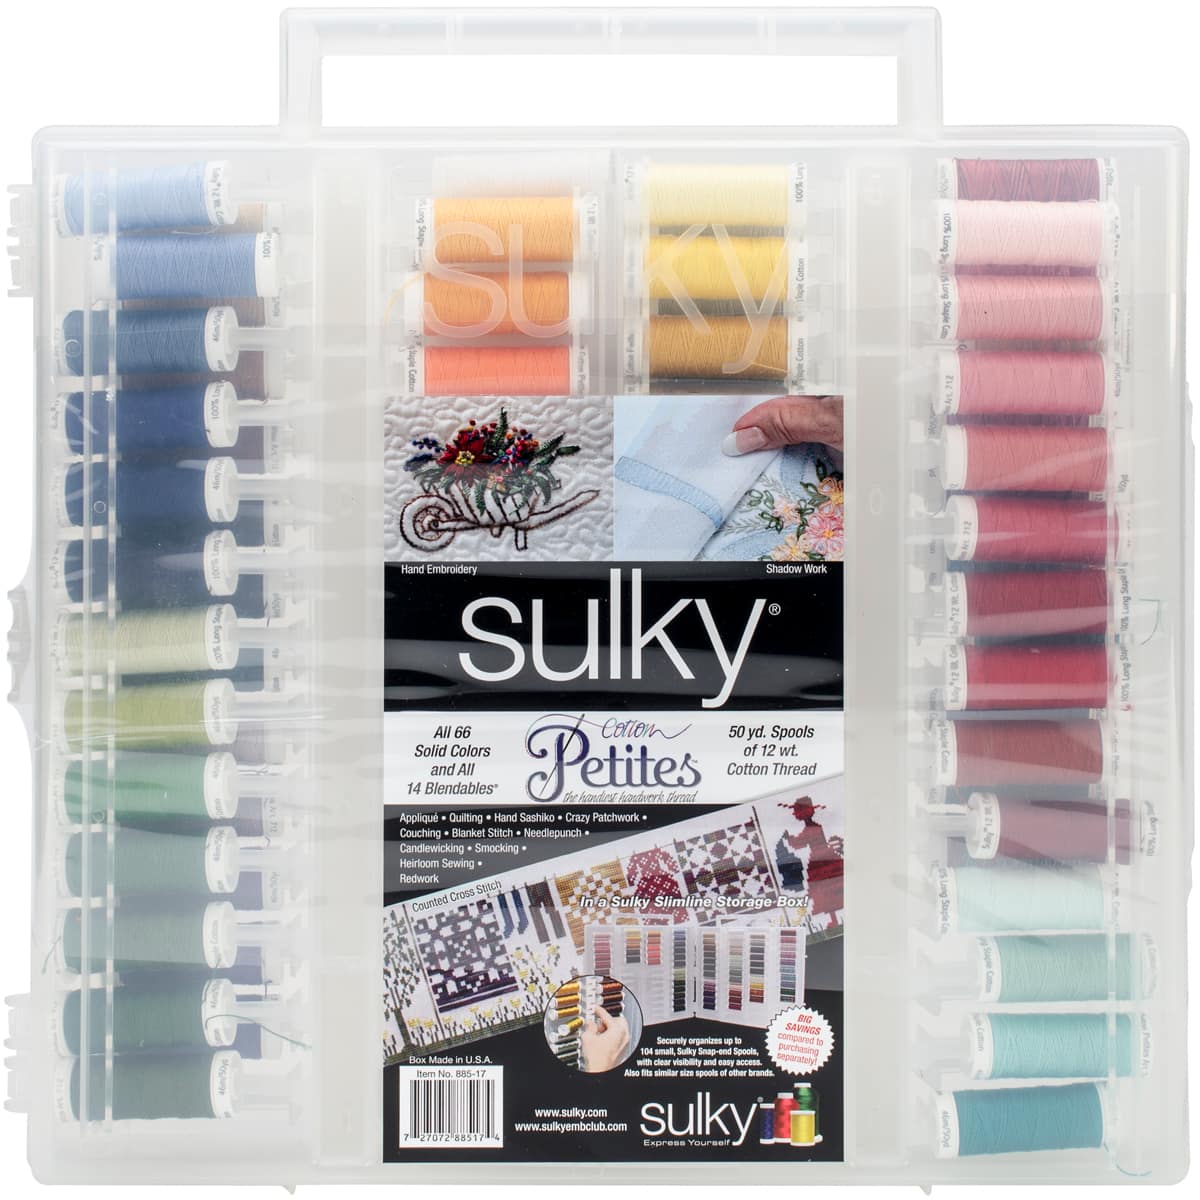 Bundle of 3 Sulky Cotton Threads to match – gather here online